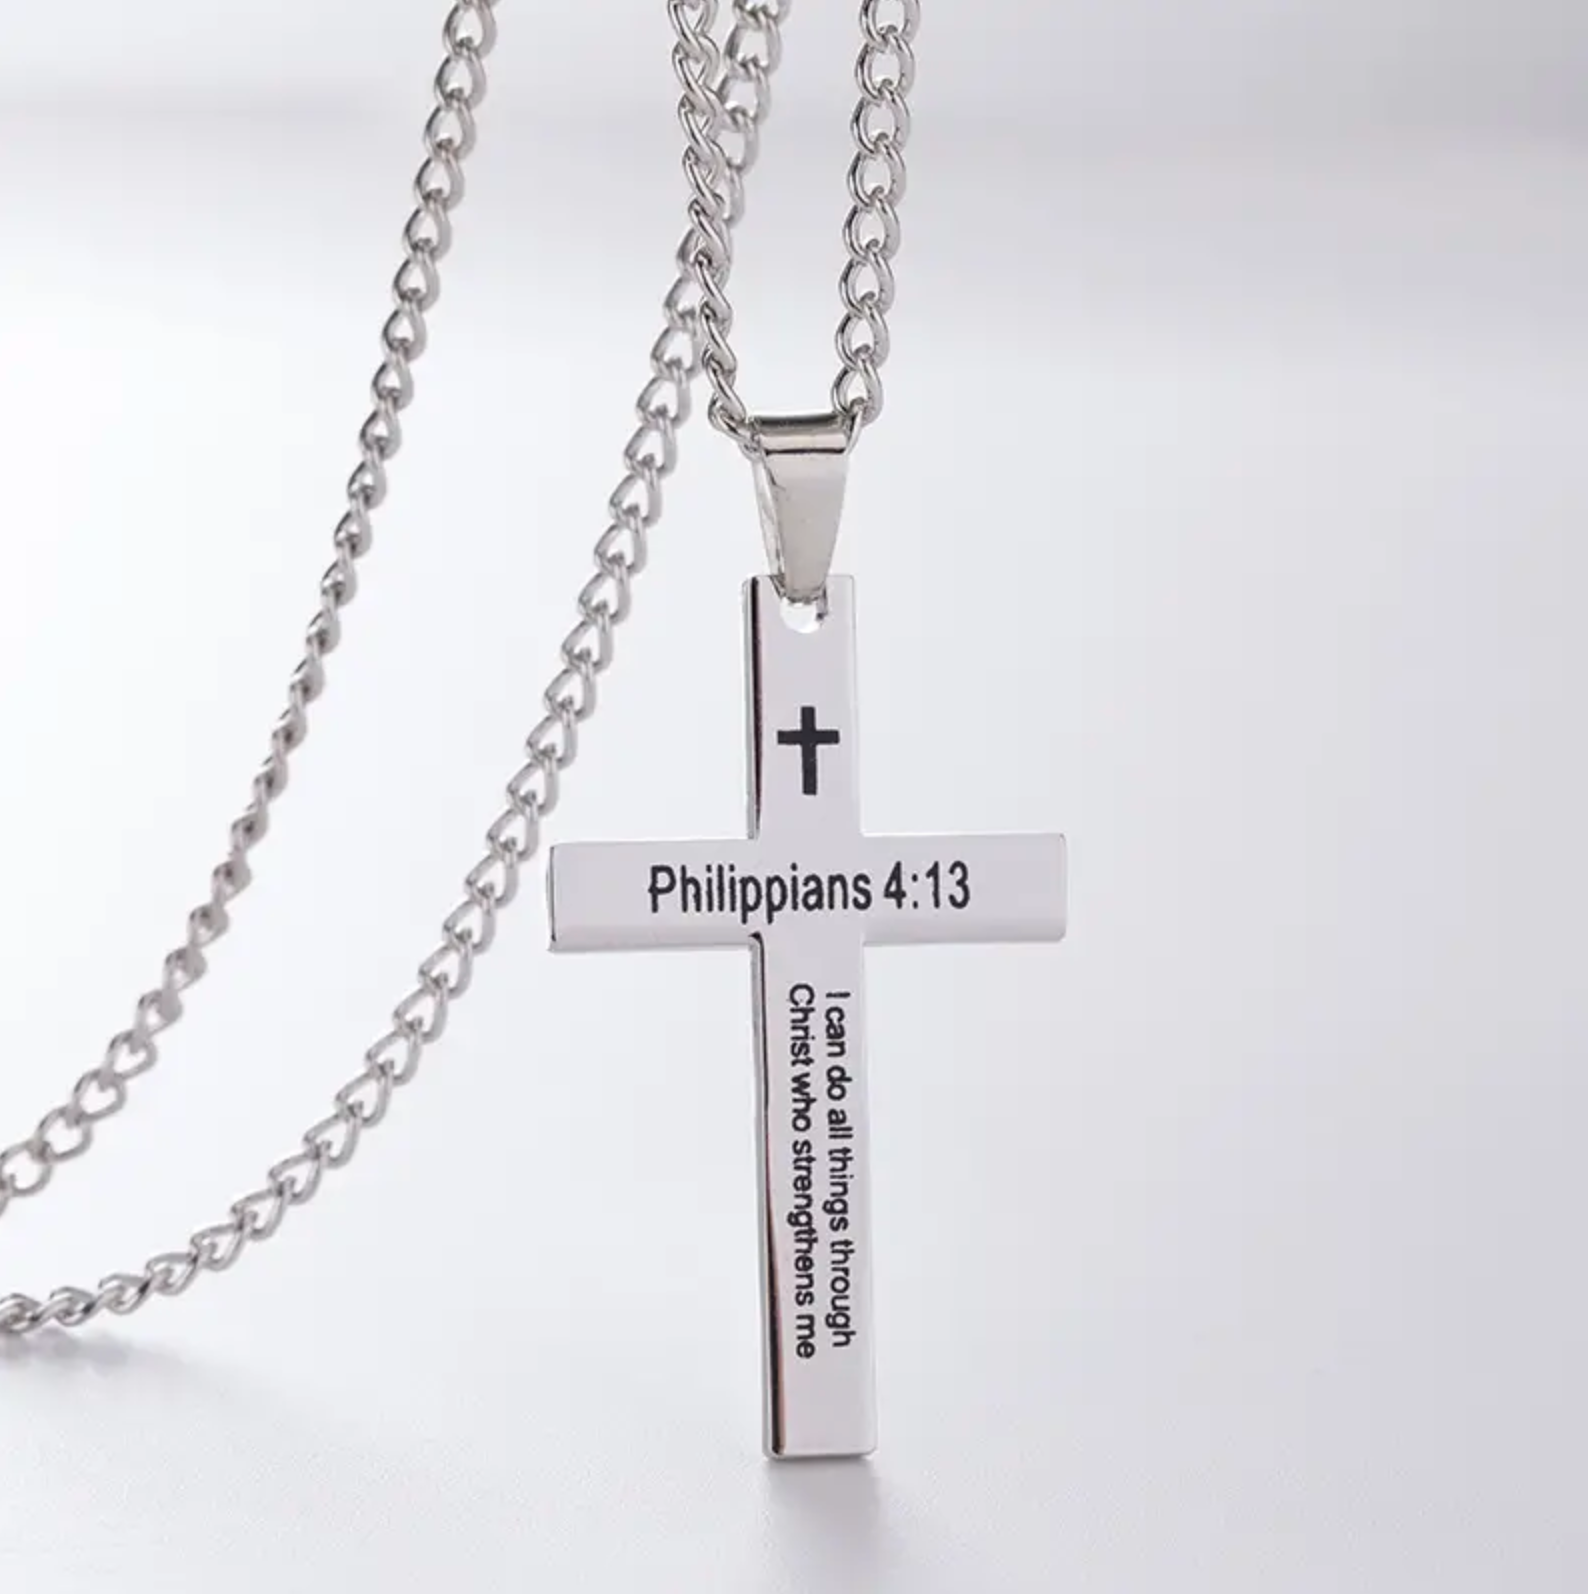 SKQIR Inspirational Cross Necklace for Men with Bible Verse,Black Bible  prayer Cross Pendant Necklace for boys with Scripture Encourage Gift |  Amazon.com